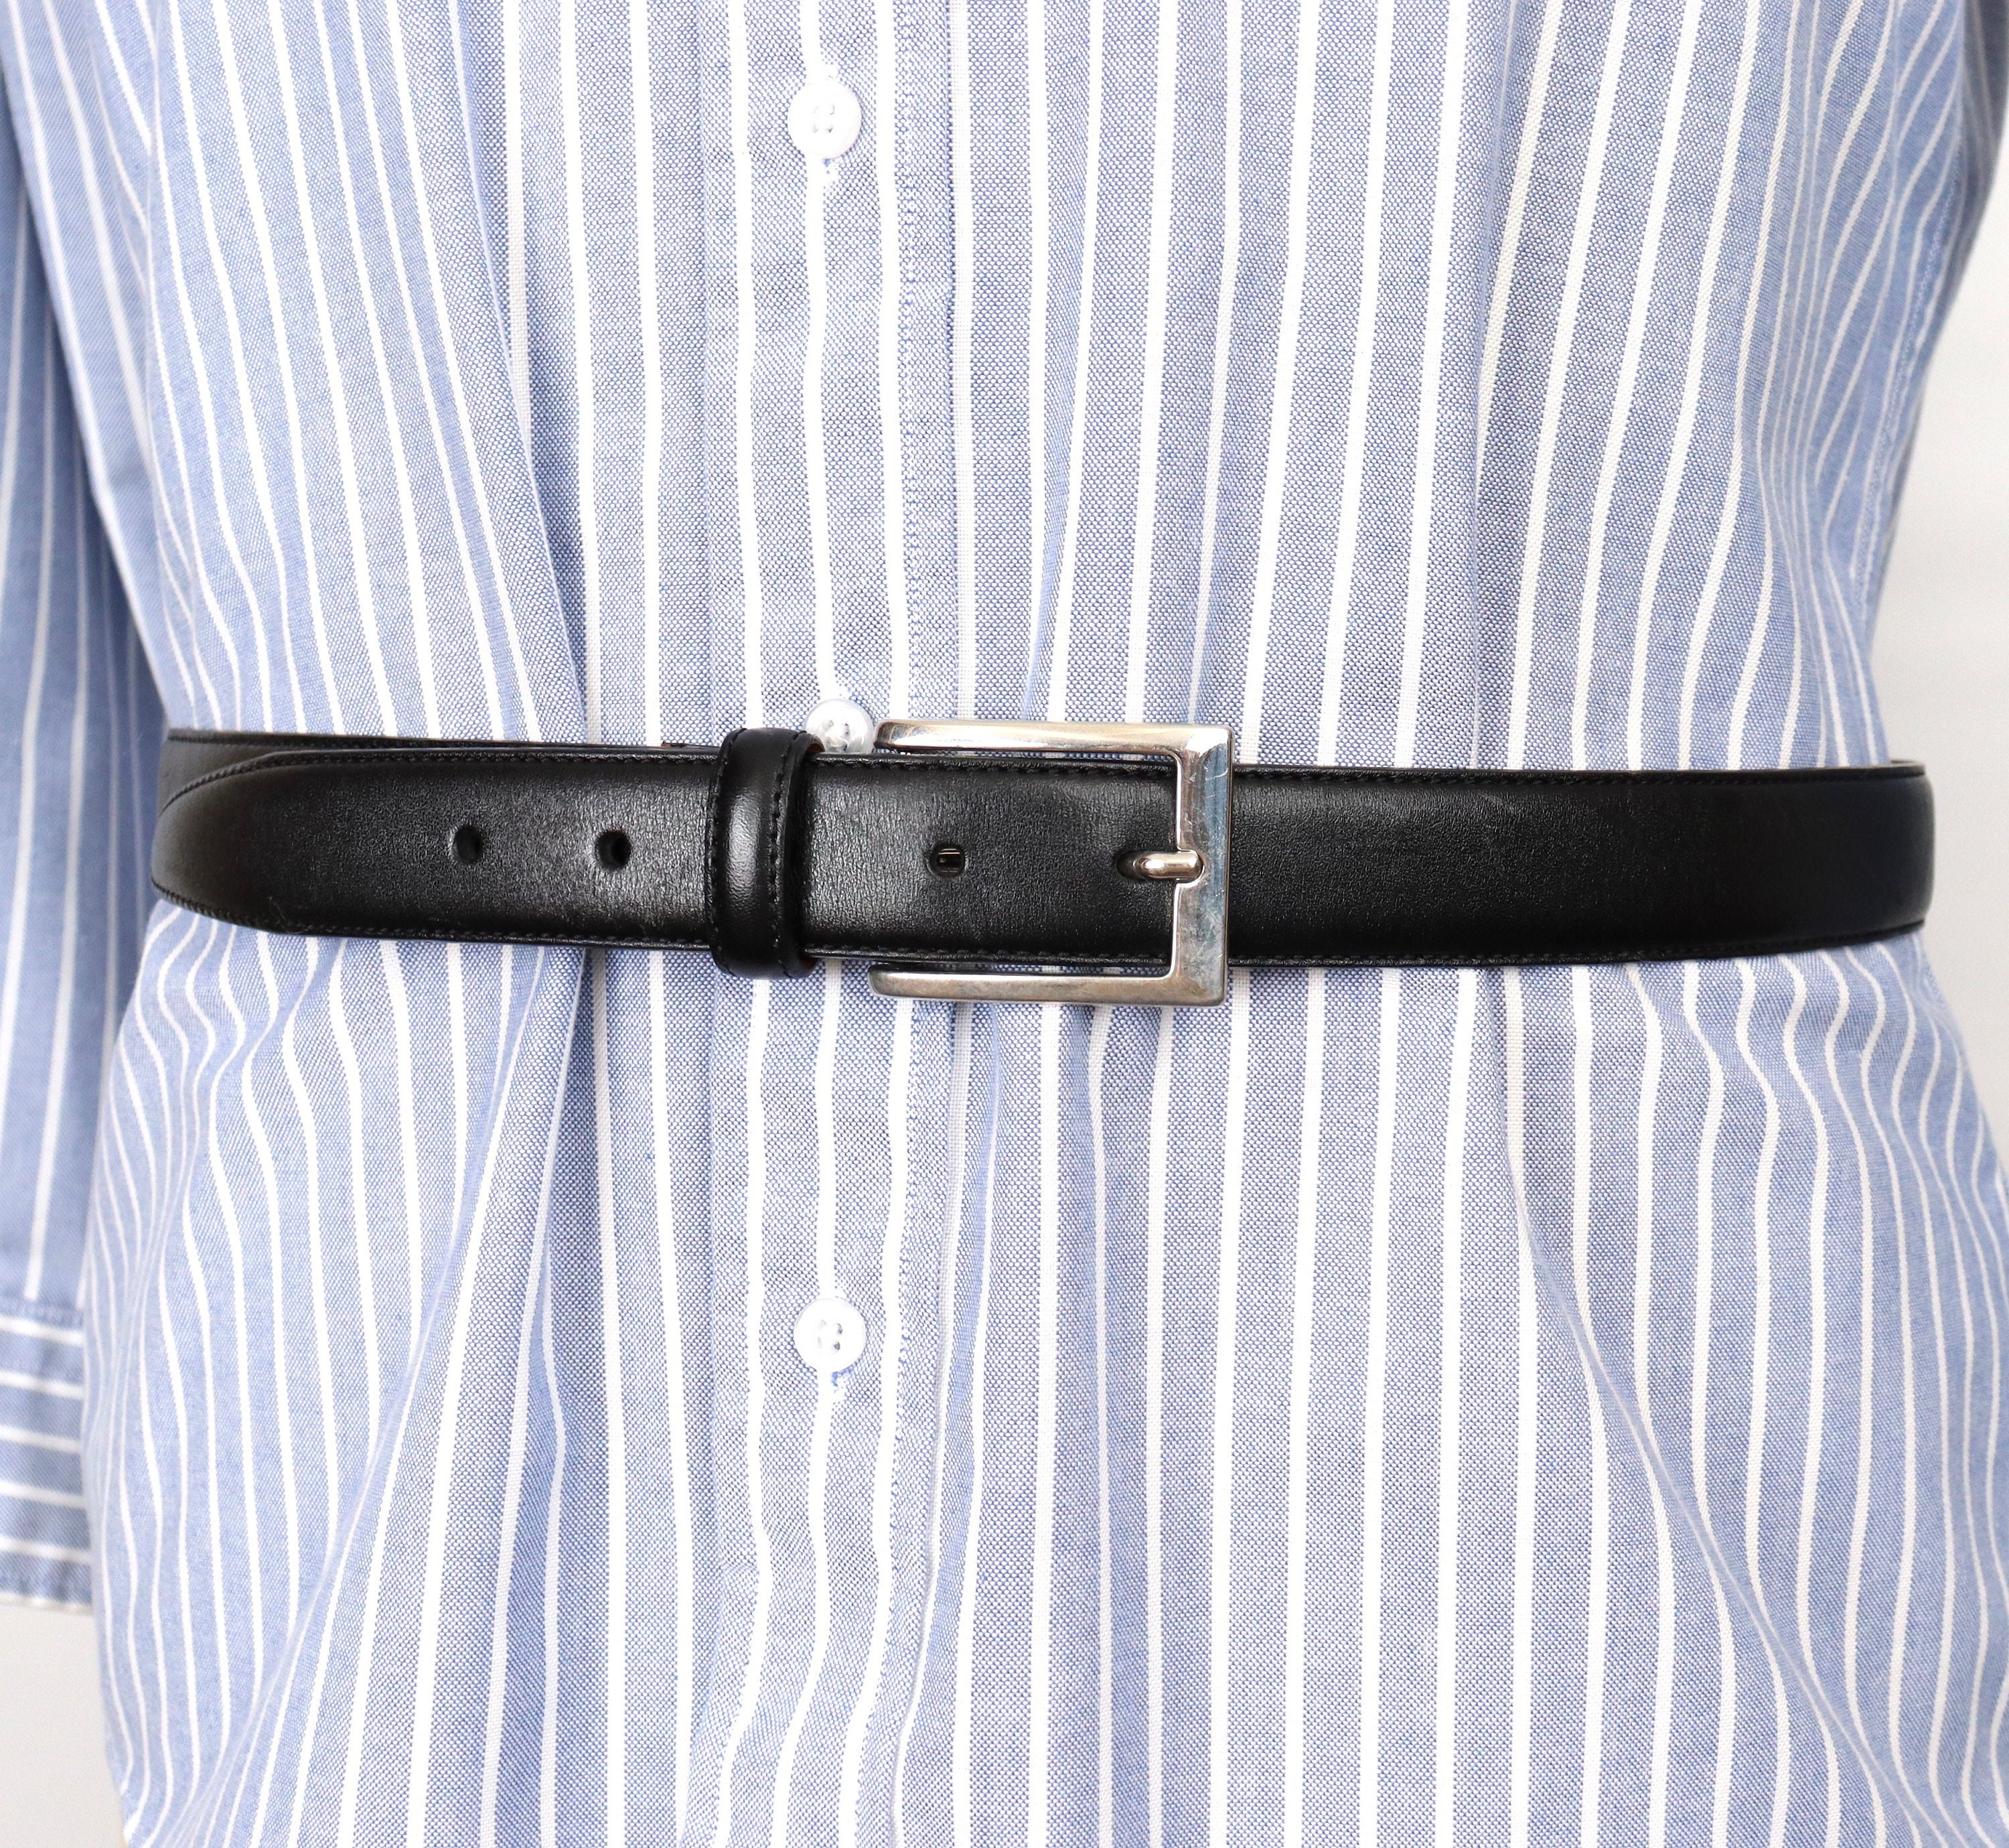 Brooks Brothers Men's Silver Buckle Leather Dress Belt | Black | Size 30 - Shop Holiday Gifts and Styles